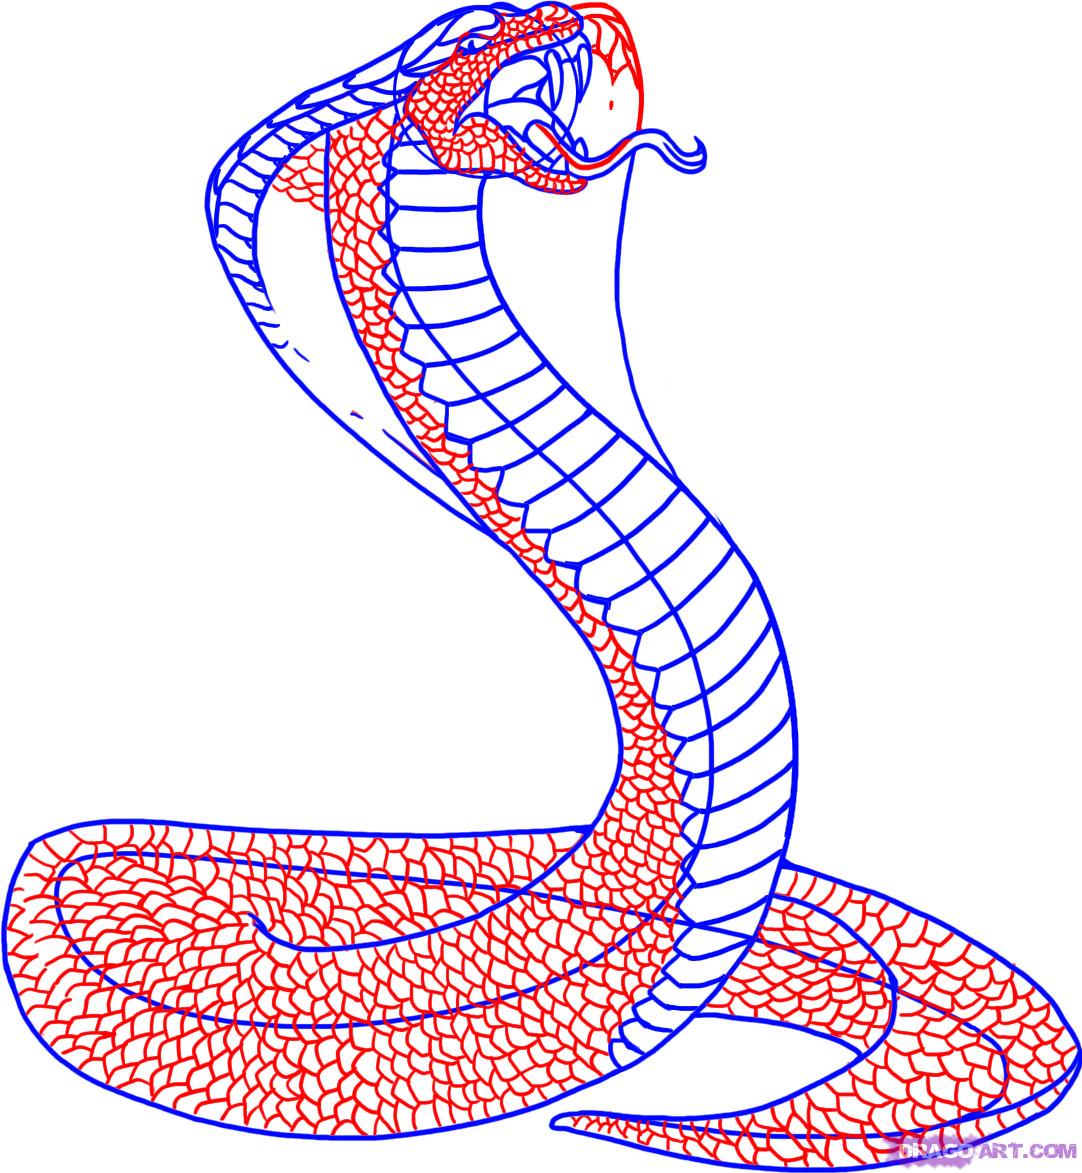 How To Draw a Snake 10 Easy Drawing Projects